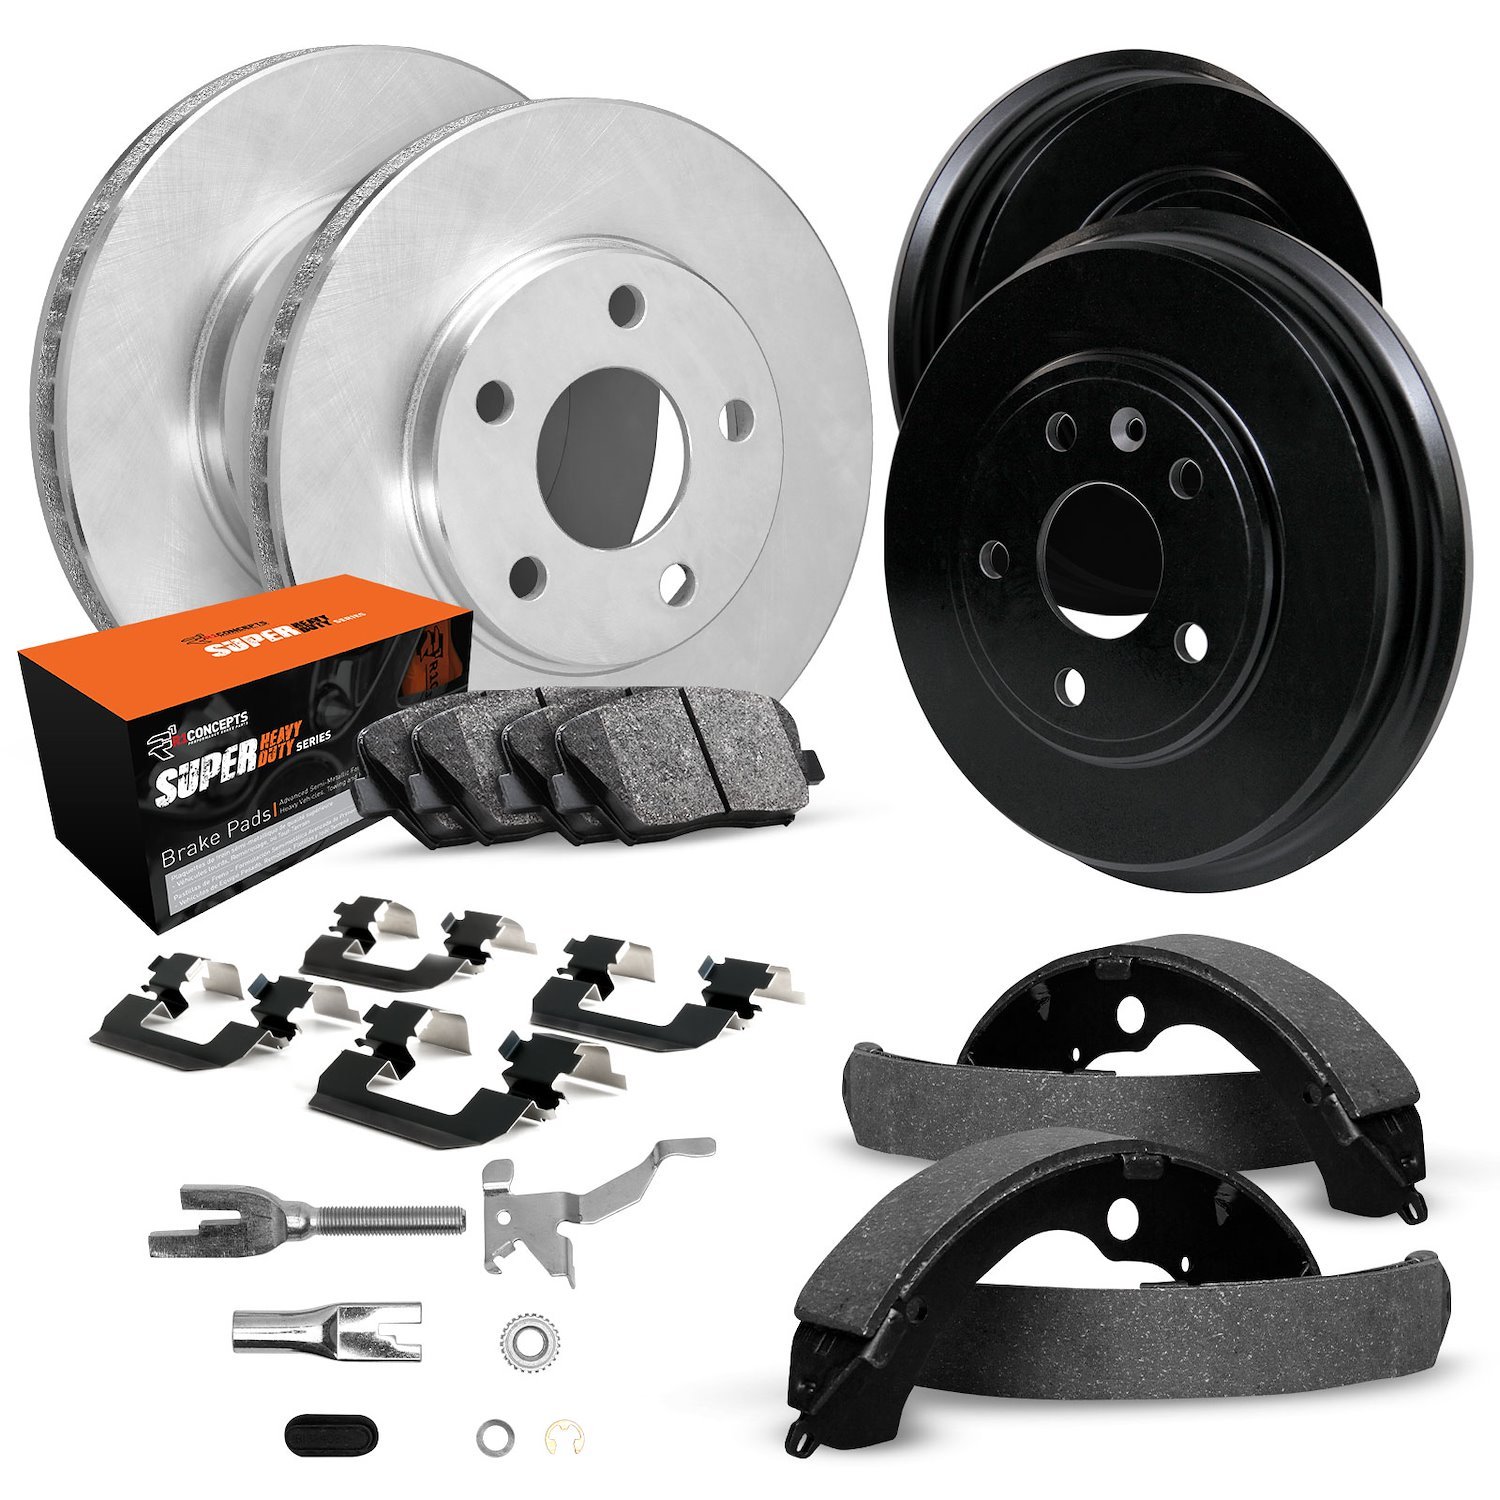 E-Line Blank Brake Rotor & Drum Set w/Super-Duty Pads, Shoes, Hardware, & Adjusters, 1975-1991 GM, Position: Front & Rear